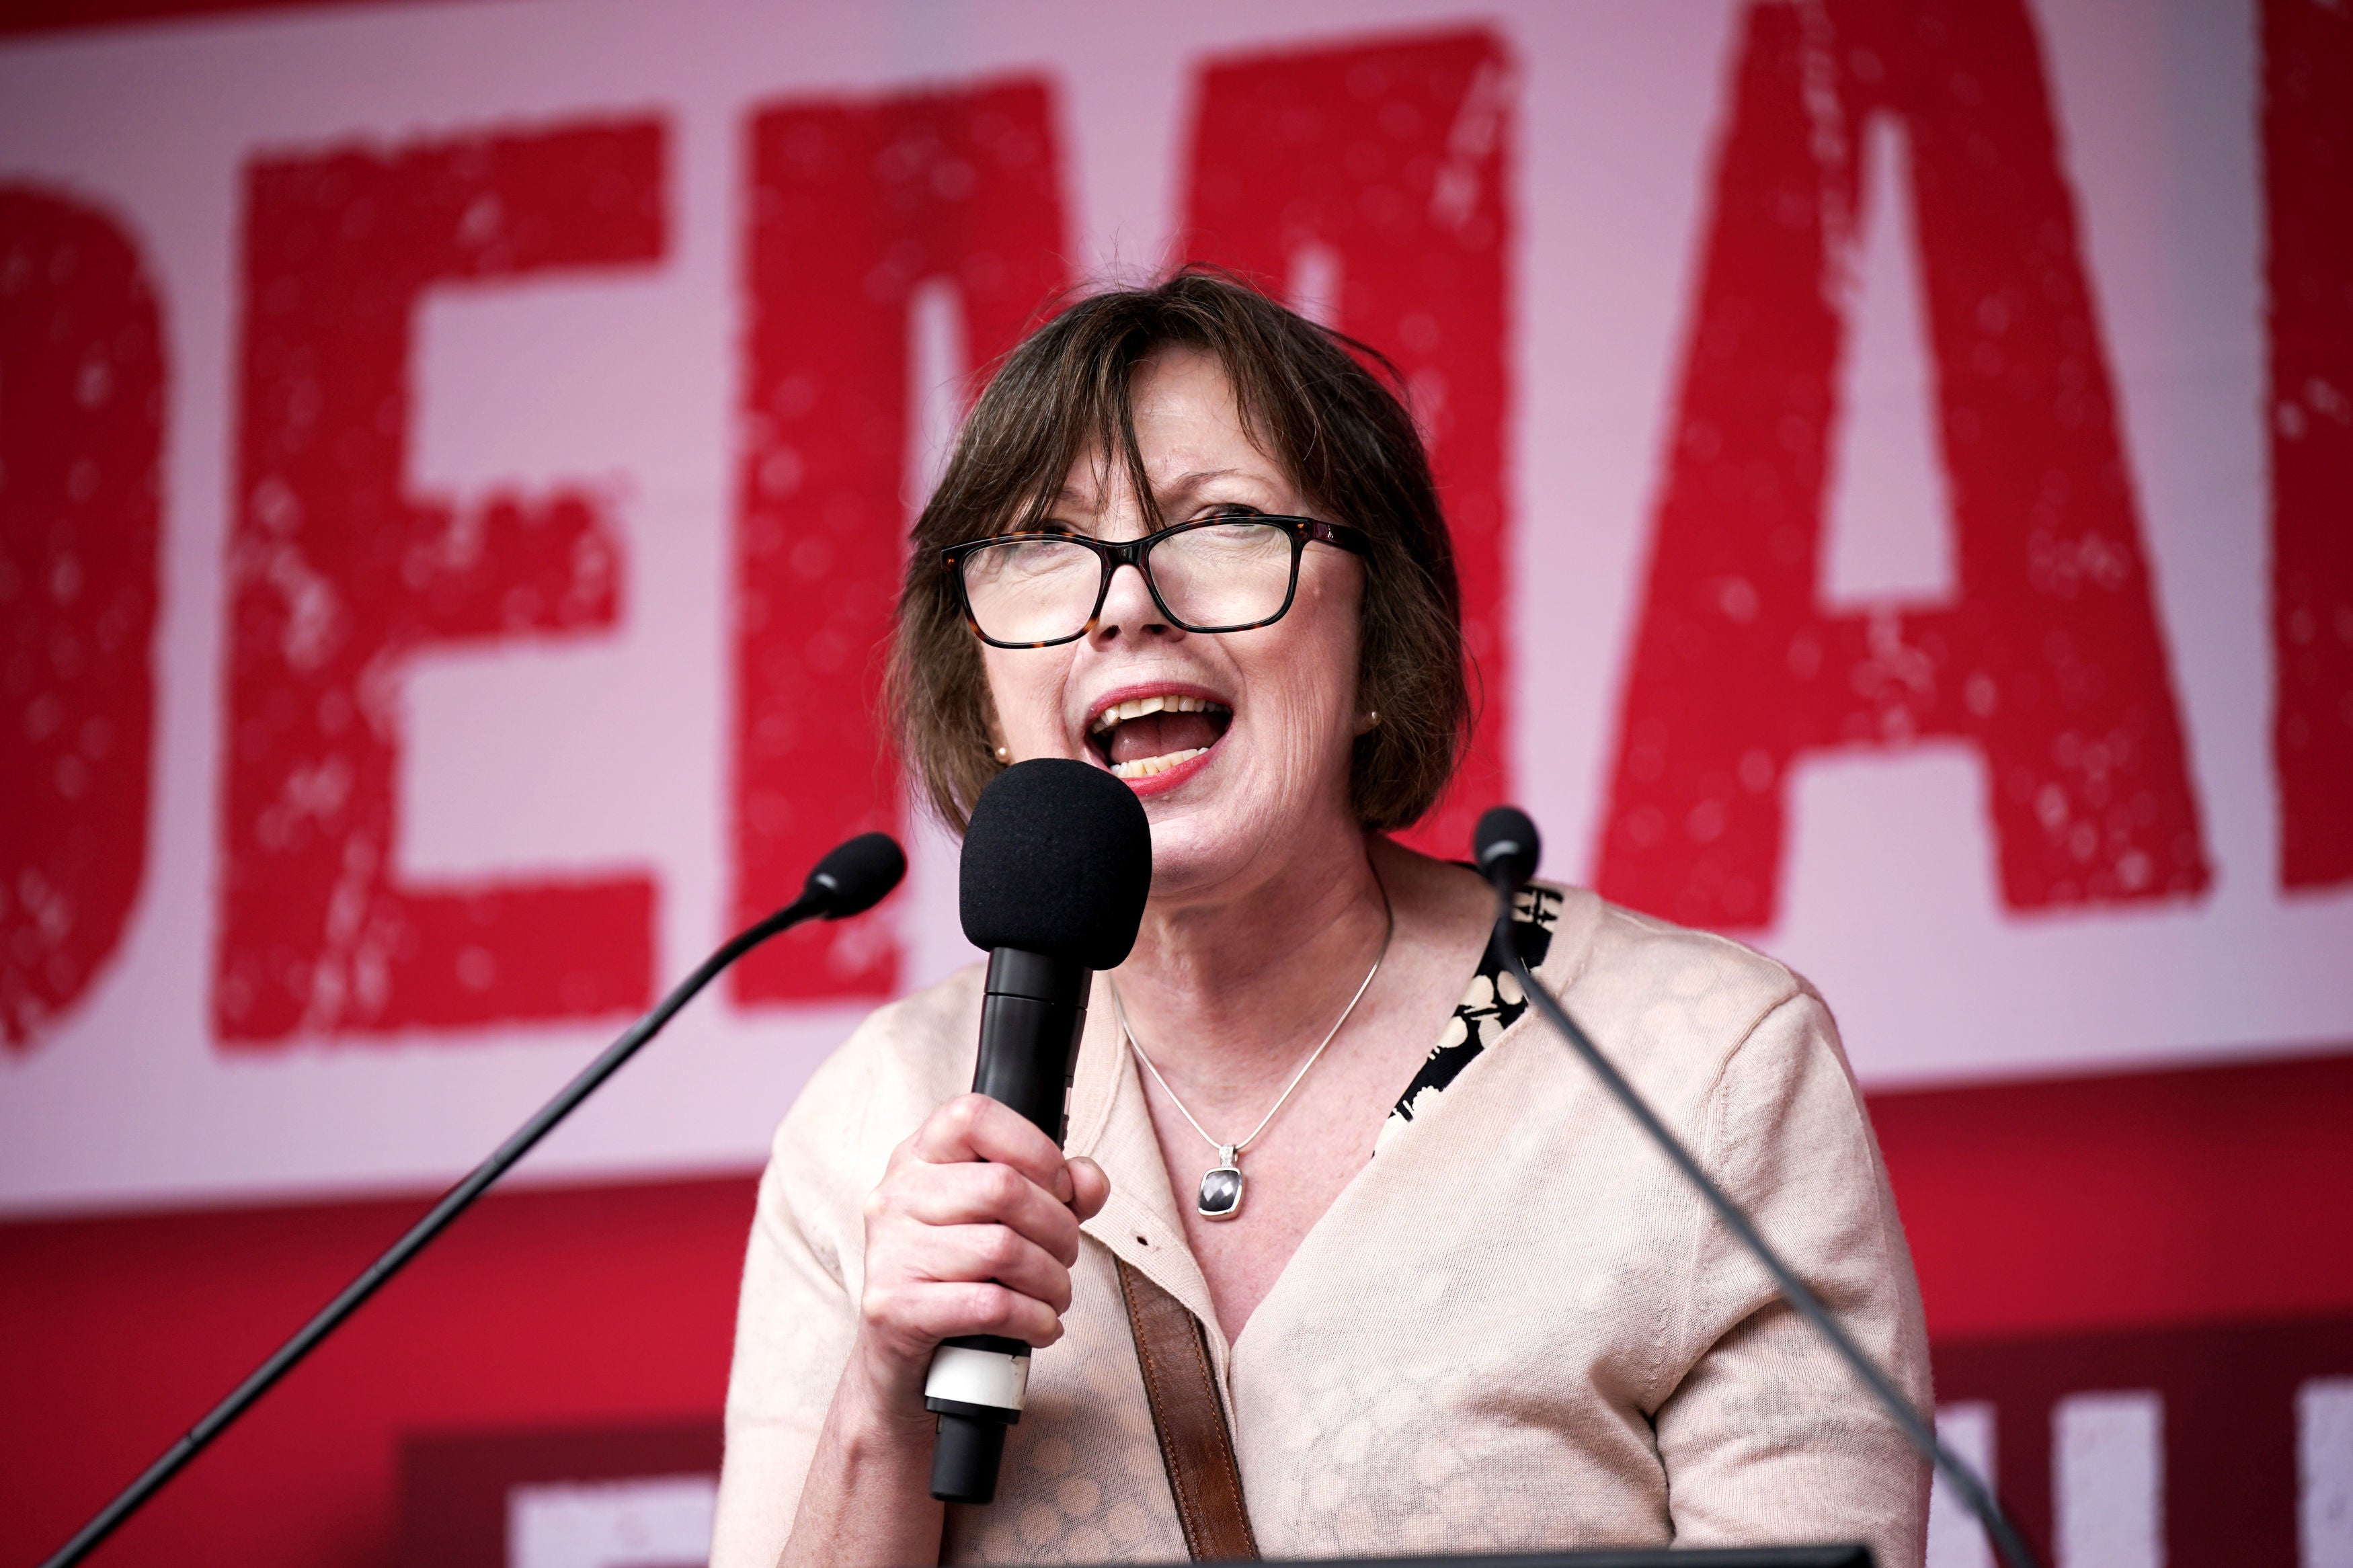 Frances O’Grady has issued a warning to new prime minister Liz Truss on workers’ rights